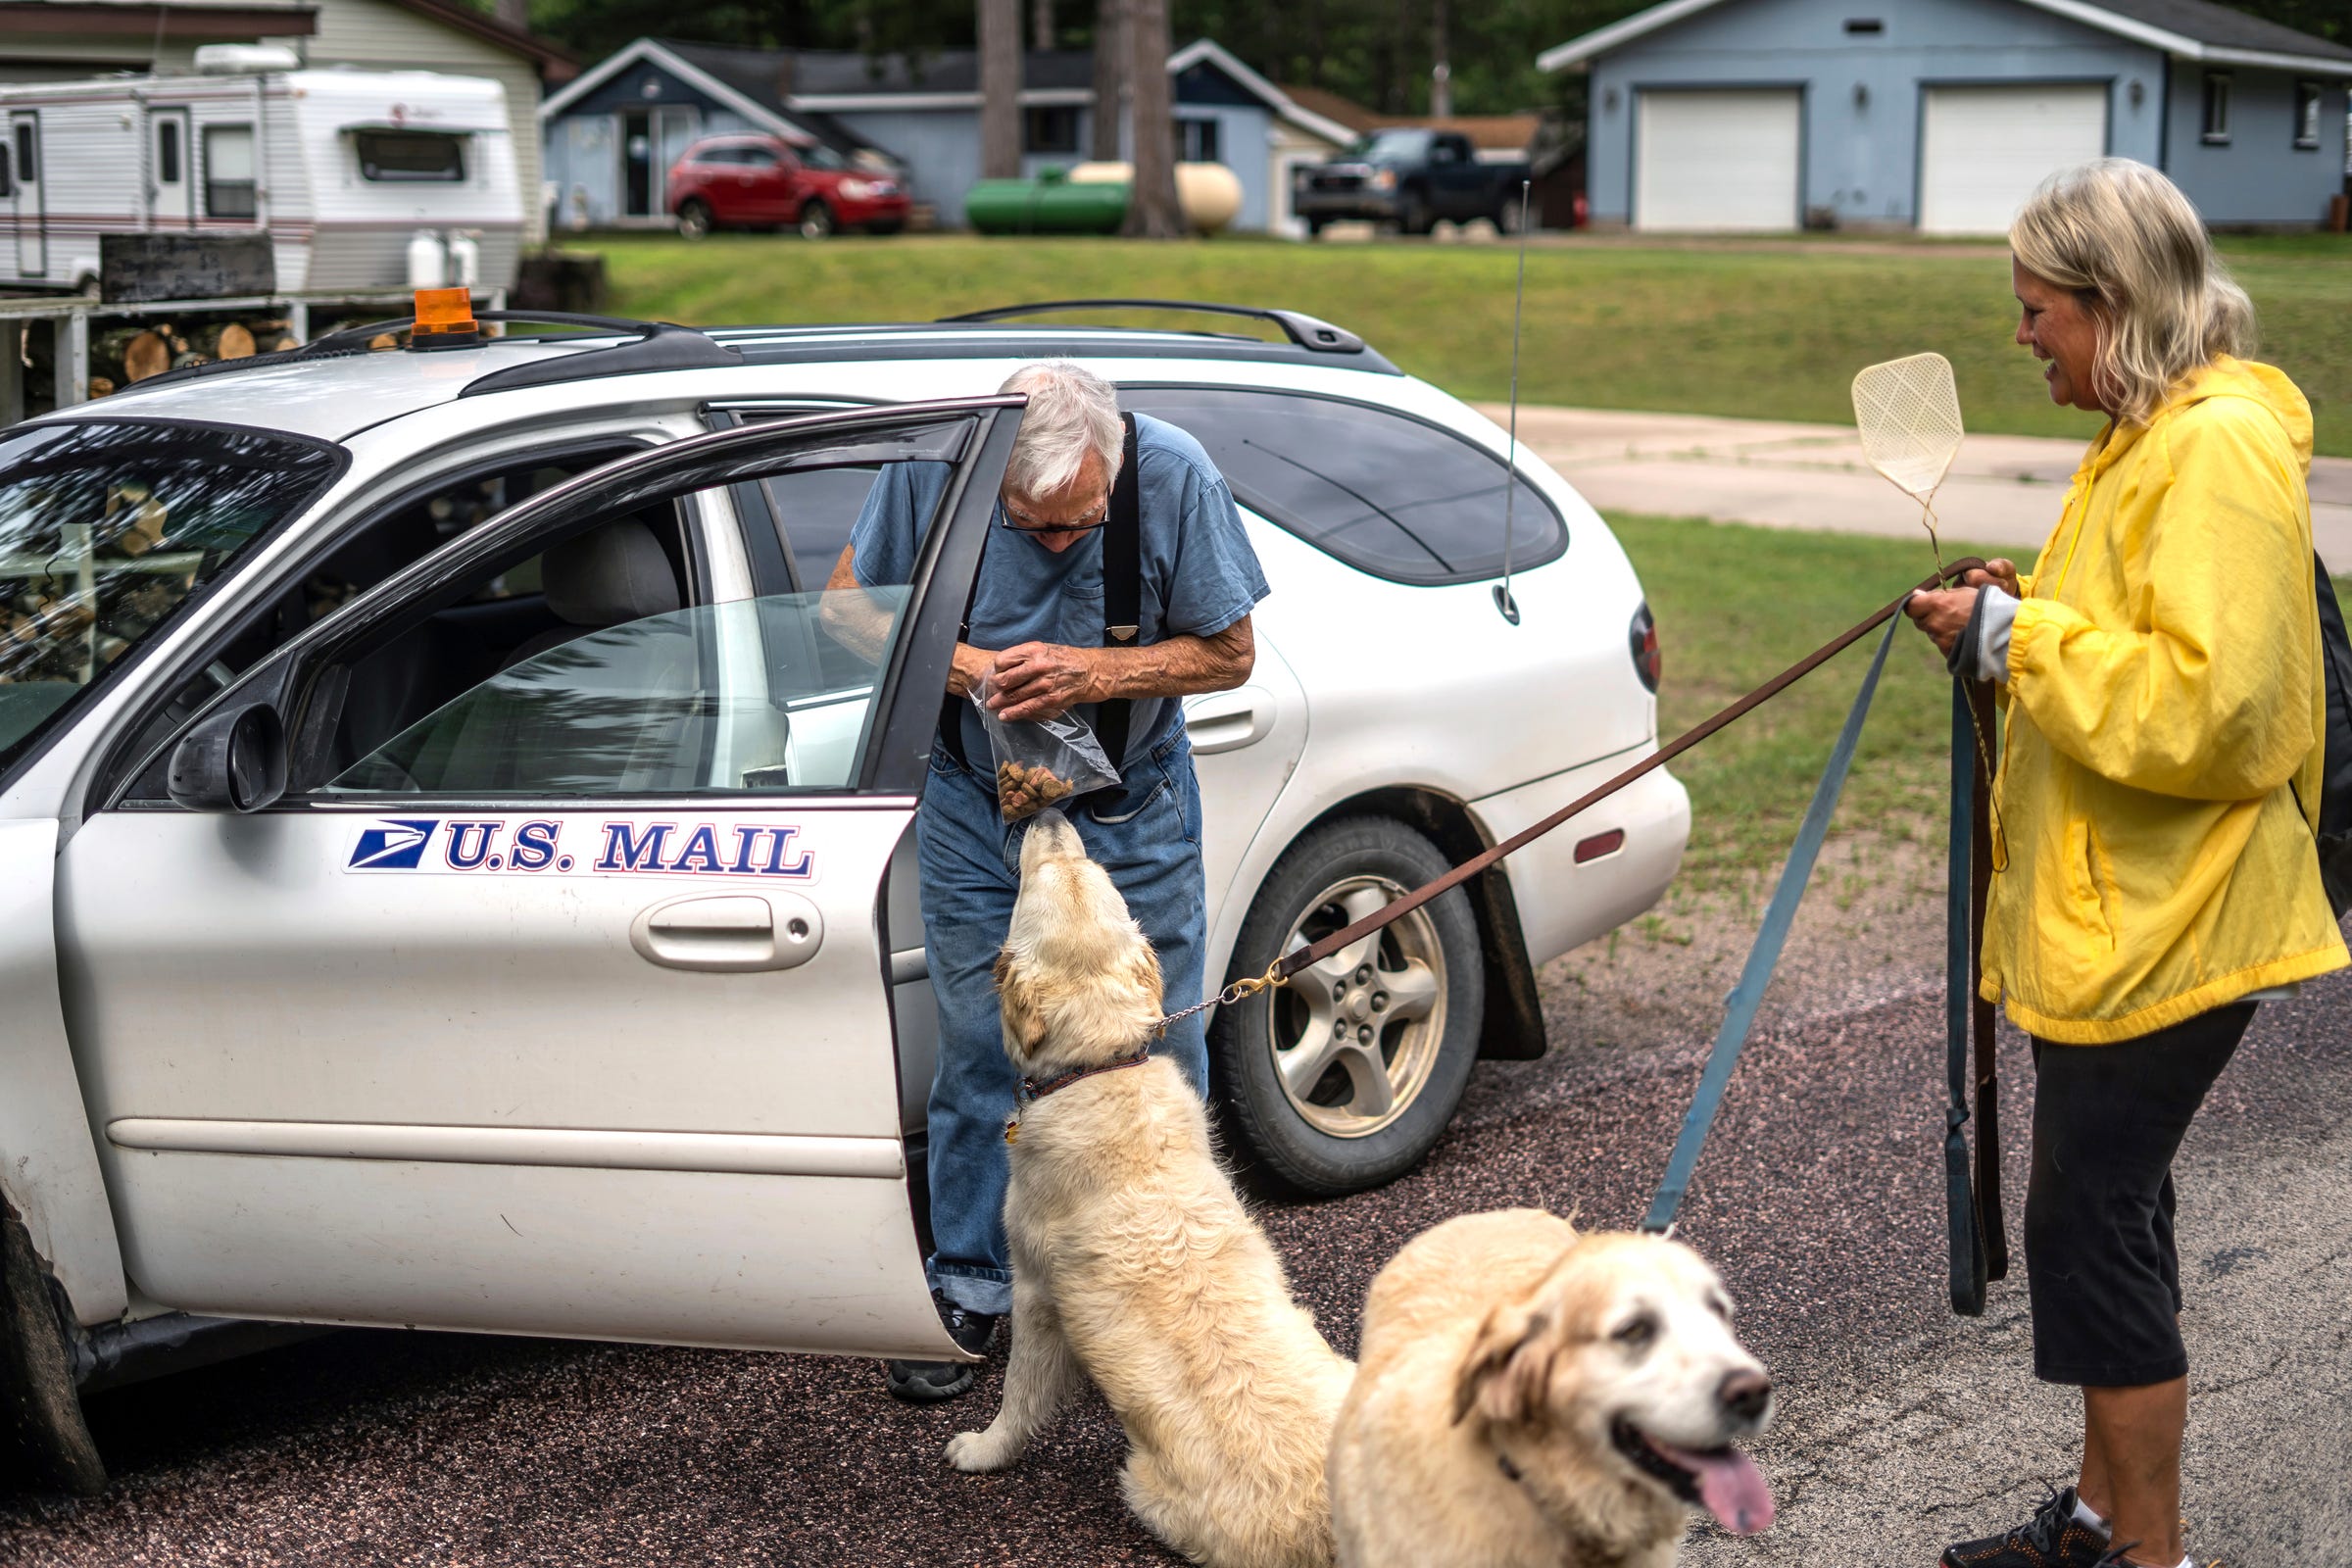 Mailman Ron Curtis, 86, of Wetmore stops to talk with Cindy Disher of Atlanta and give treats to her two dogs Belle and Ames as she walks along the street in Michigan's Upper Peninsula on Wednesday, July 27, 2022.